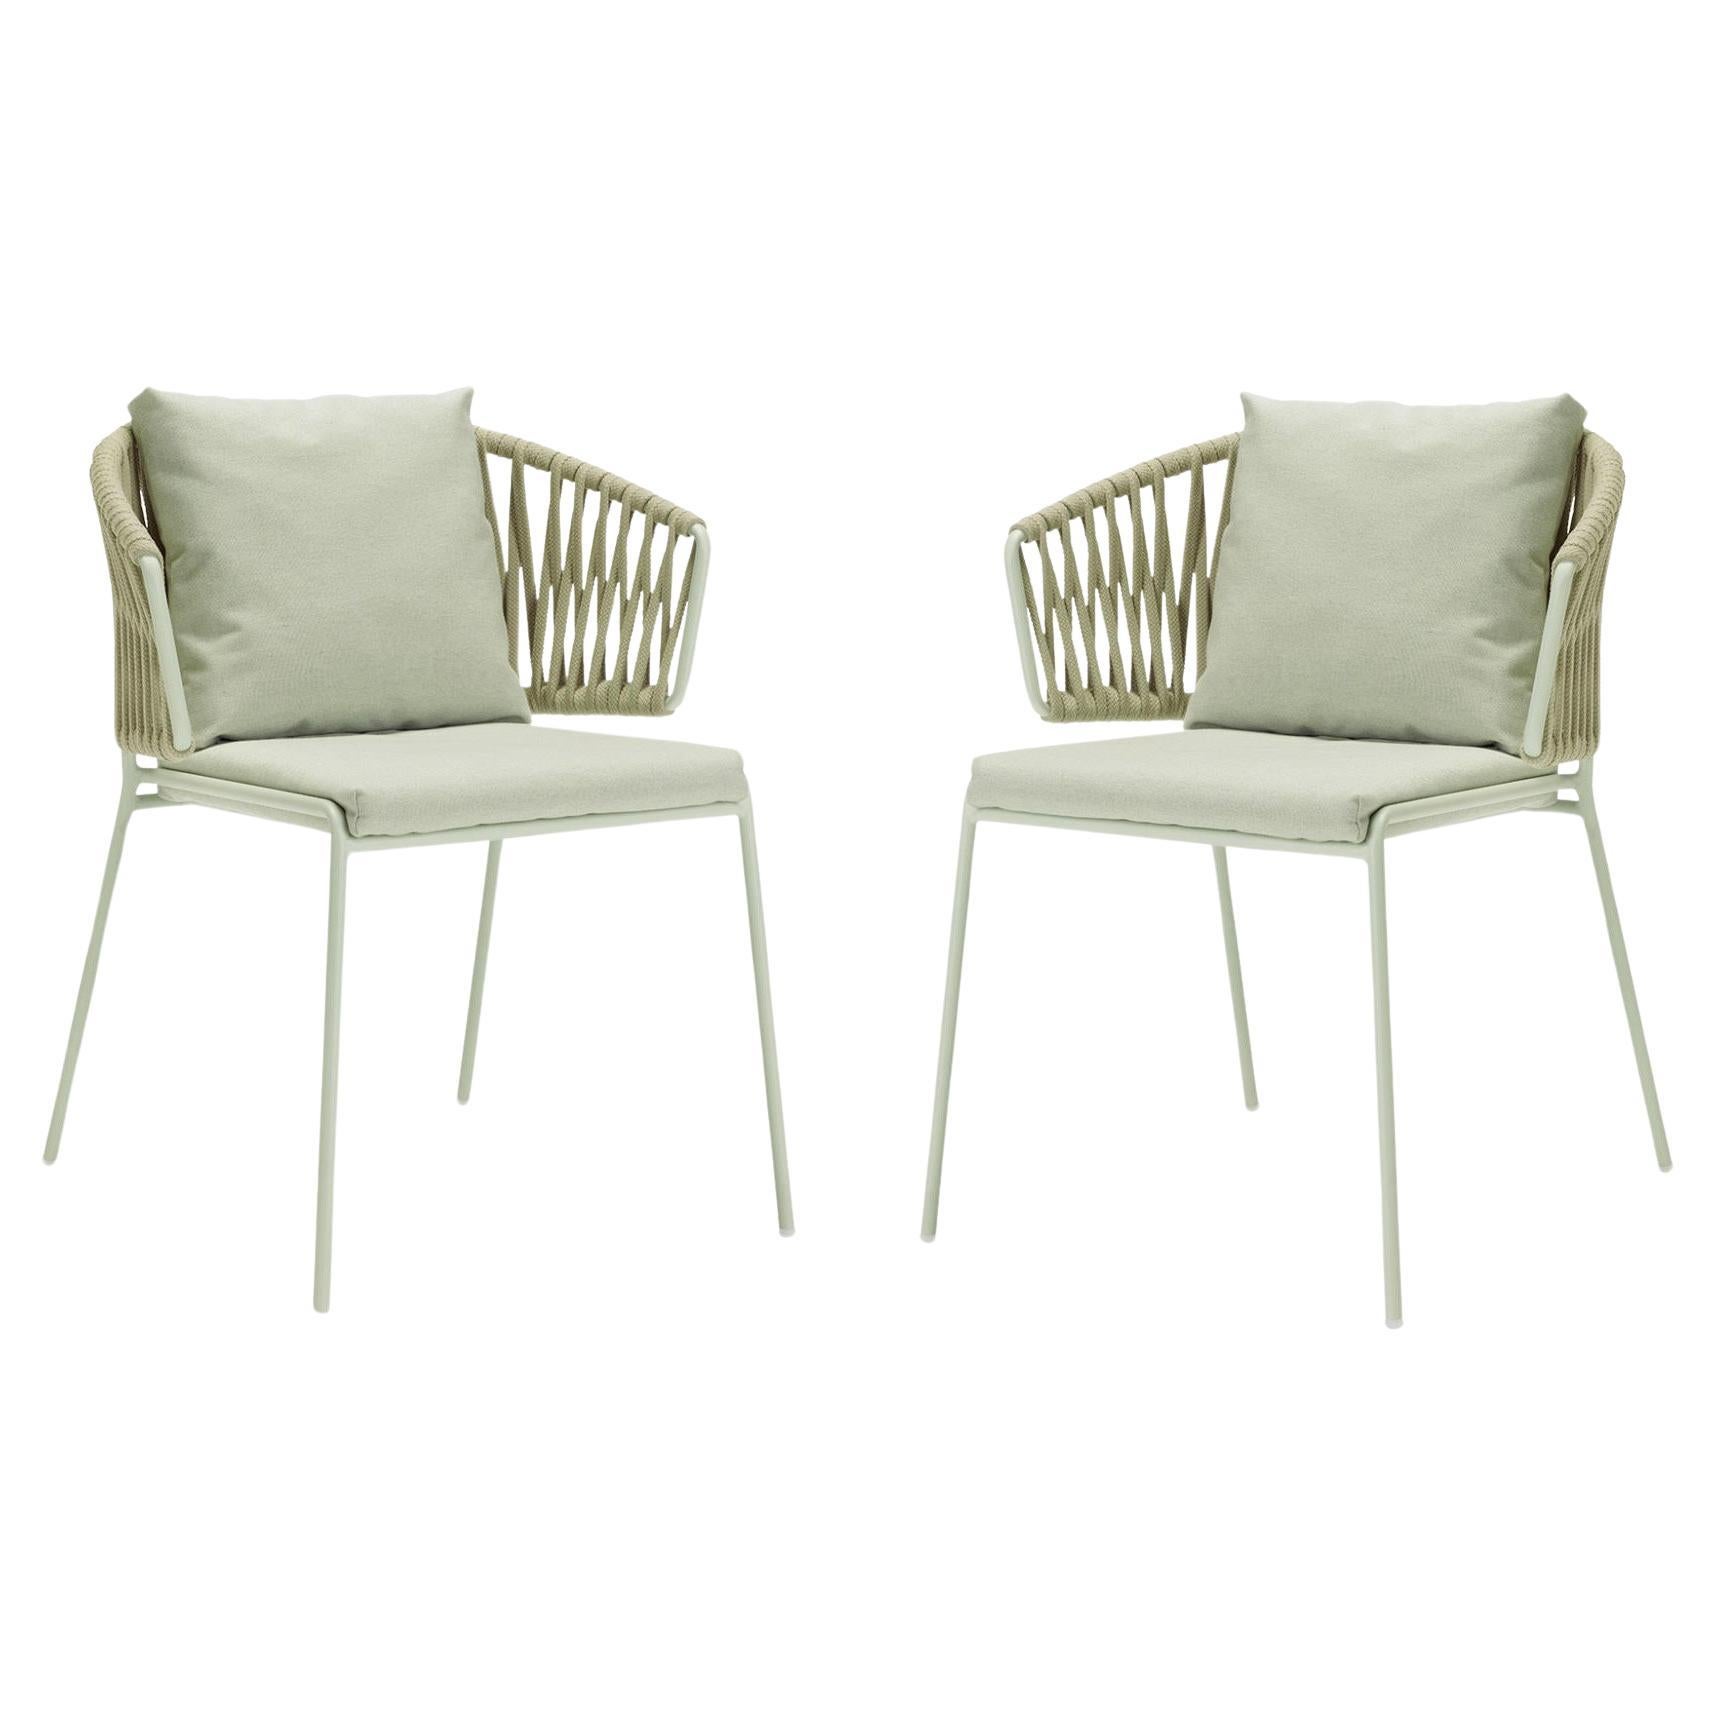 Pair of Cream Outdoor or Indoor Metal and Cord Armchairs, 21 century For Sale